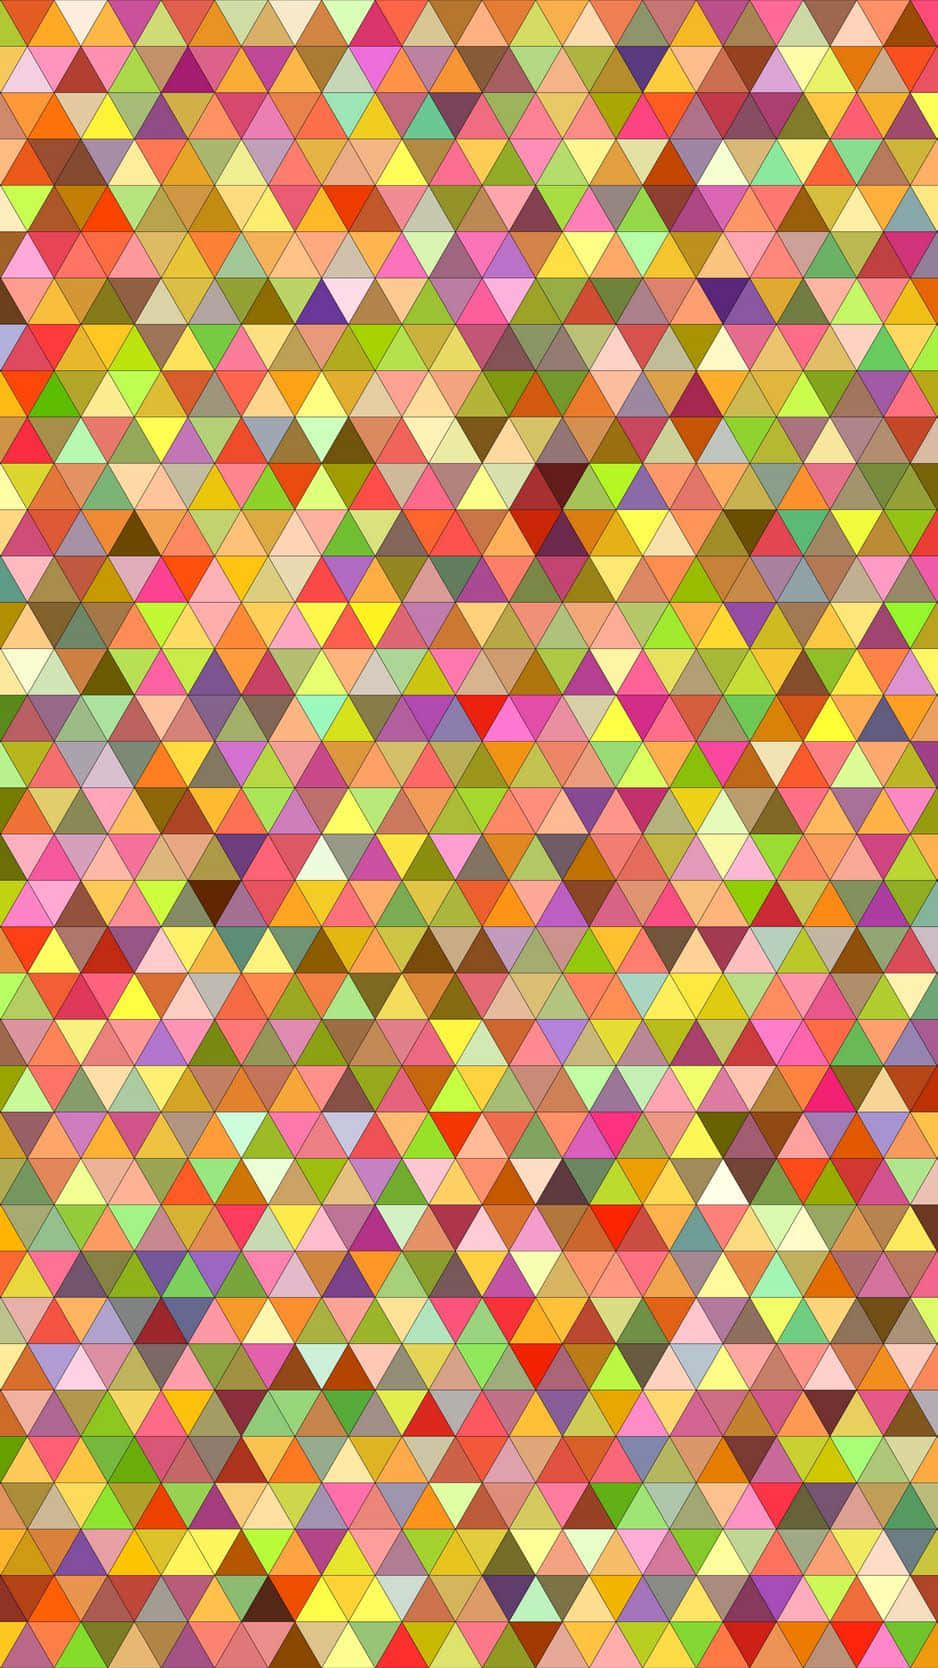 A psychedelic pattern of bright colors in a multicolor design